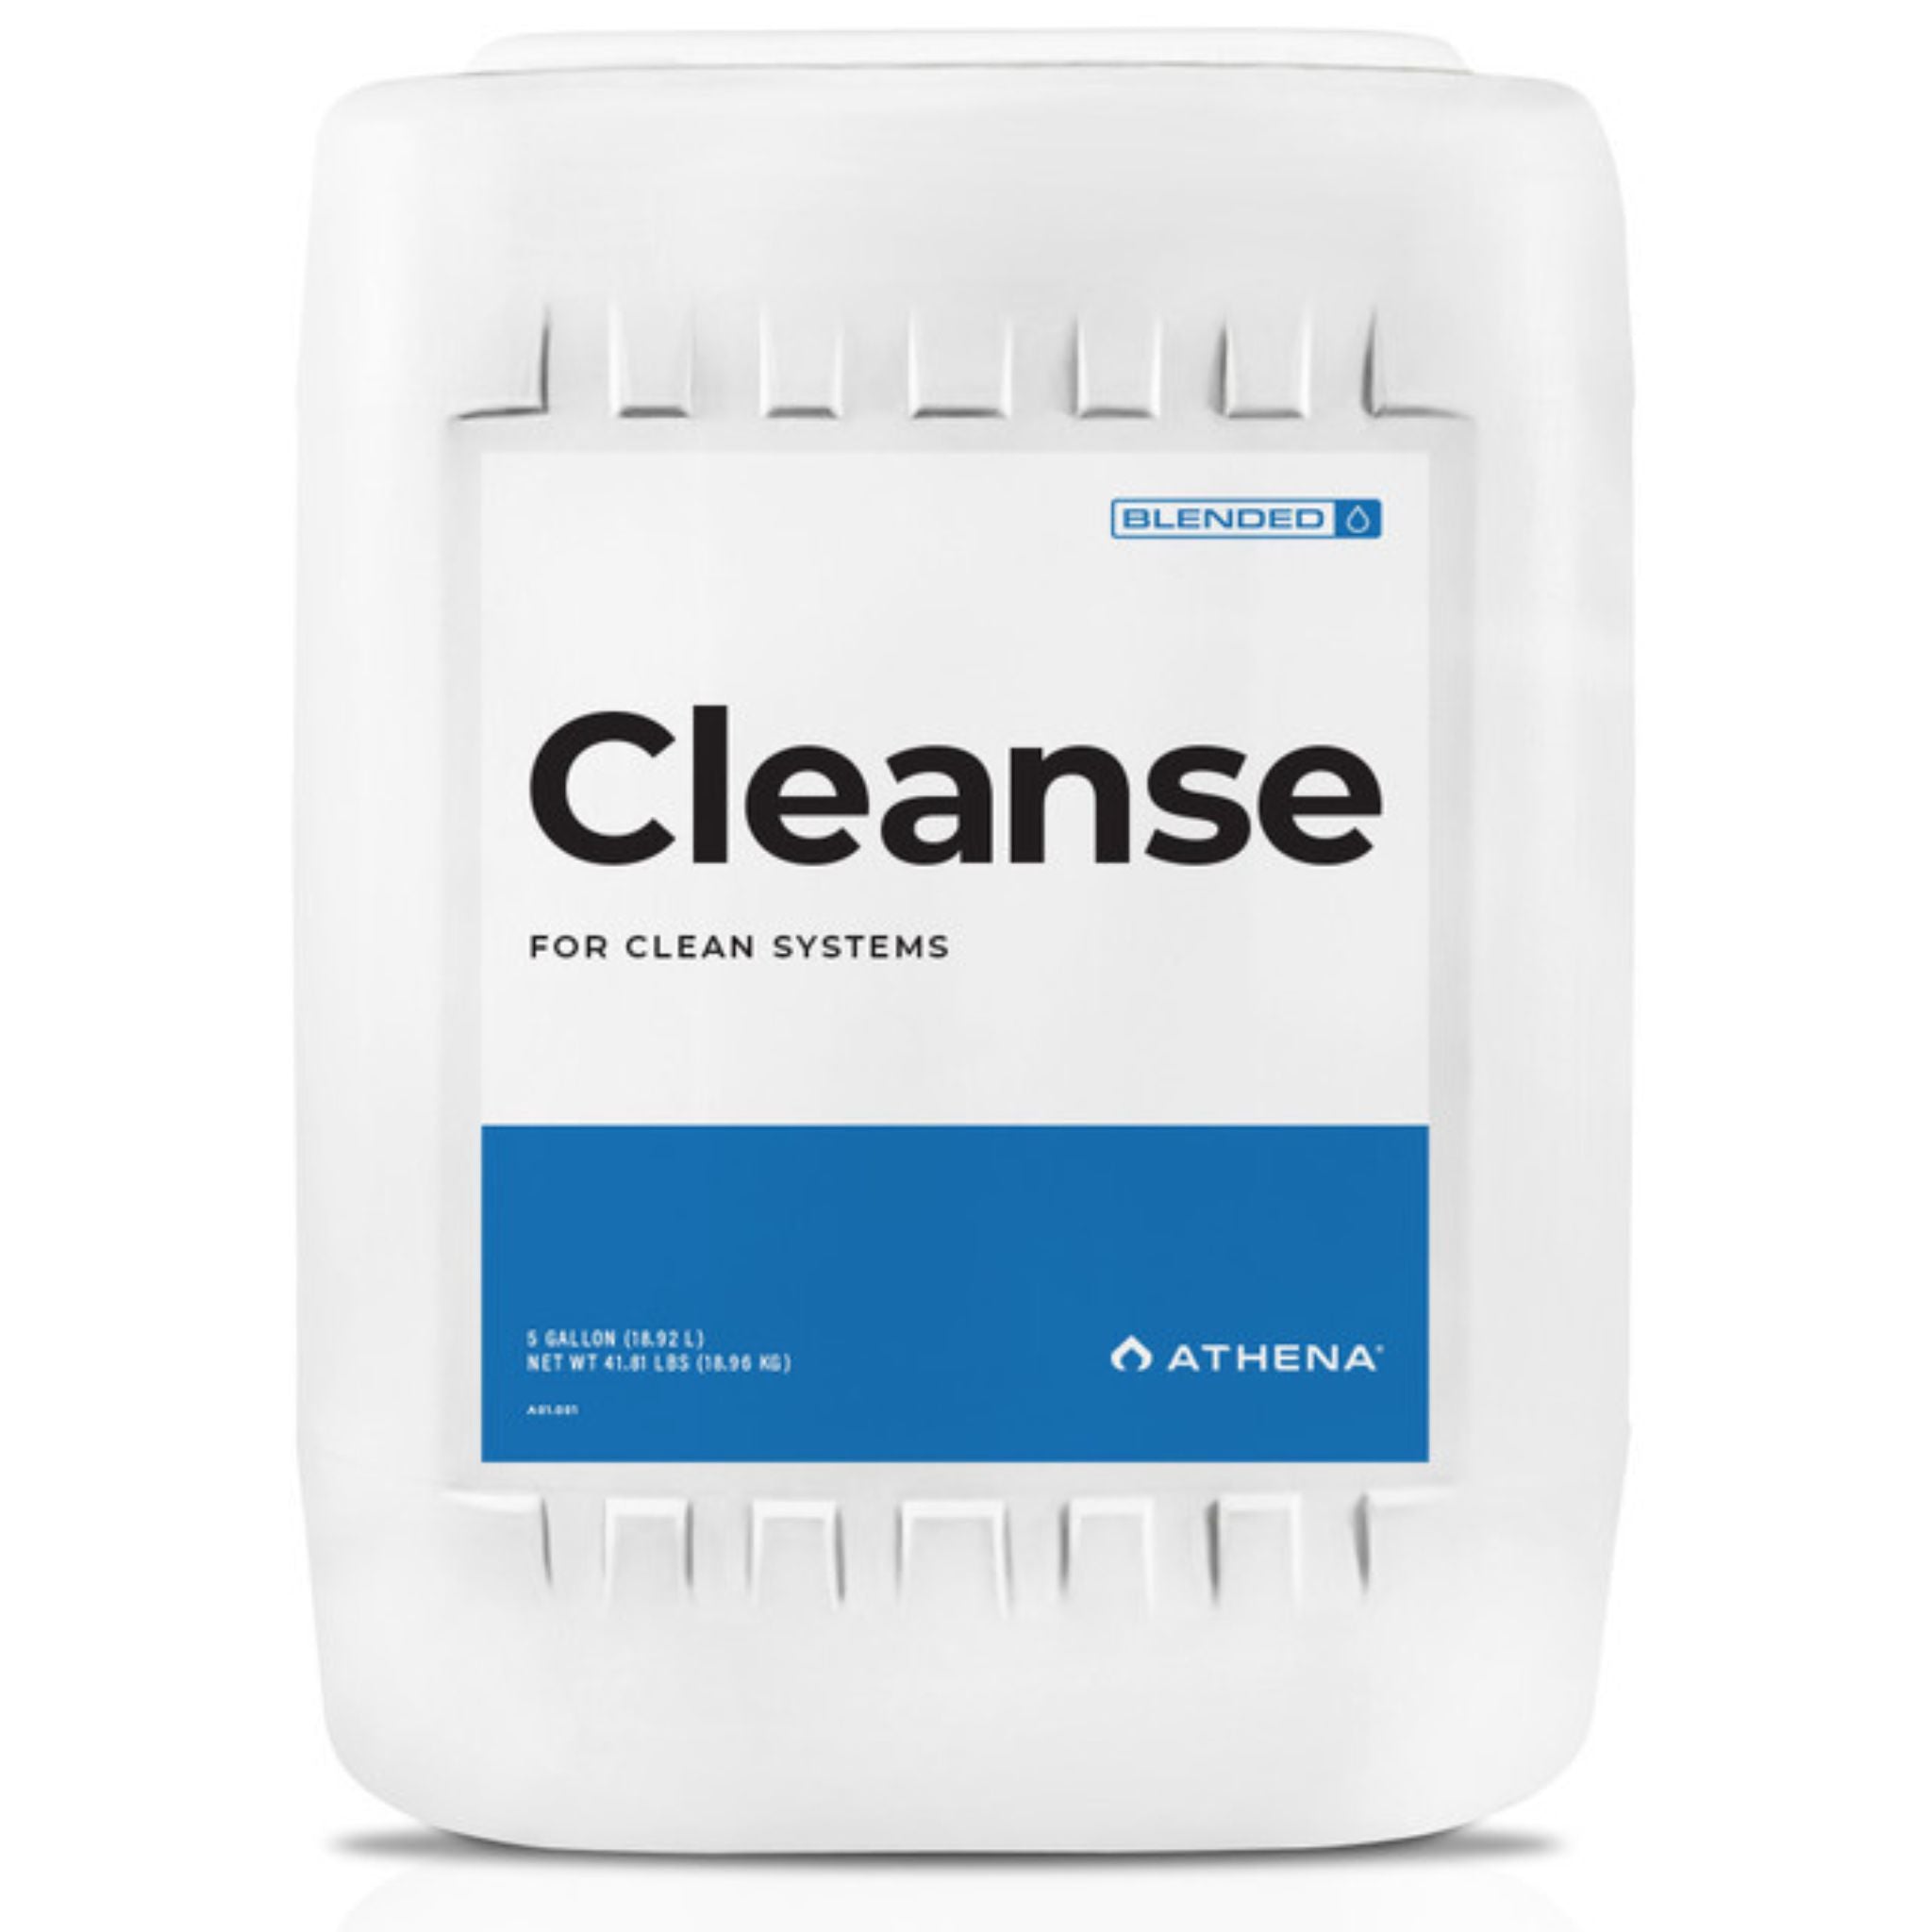 Athena Blended Cleanse